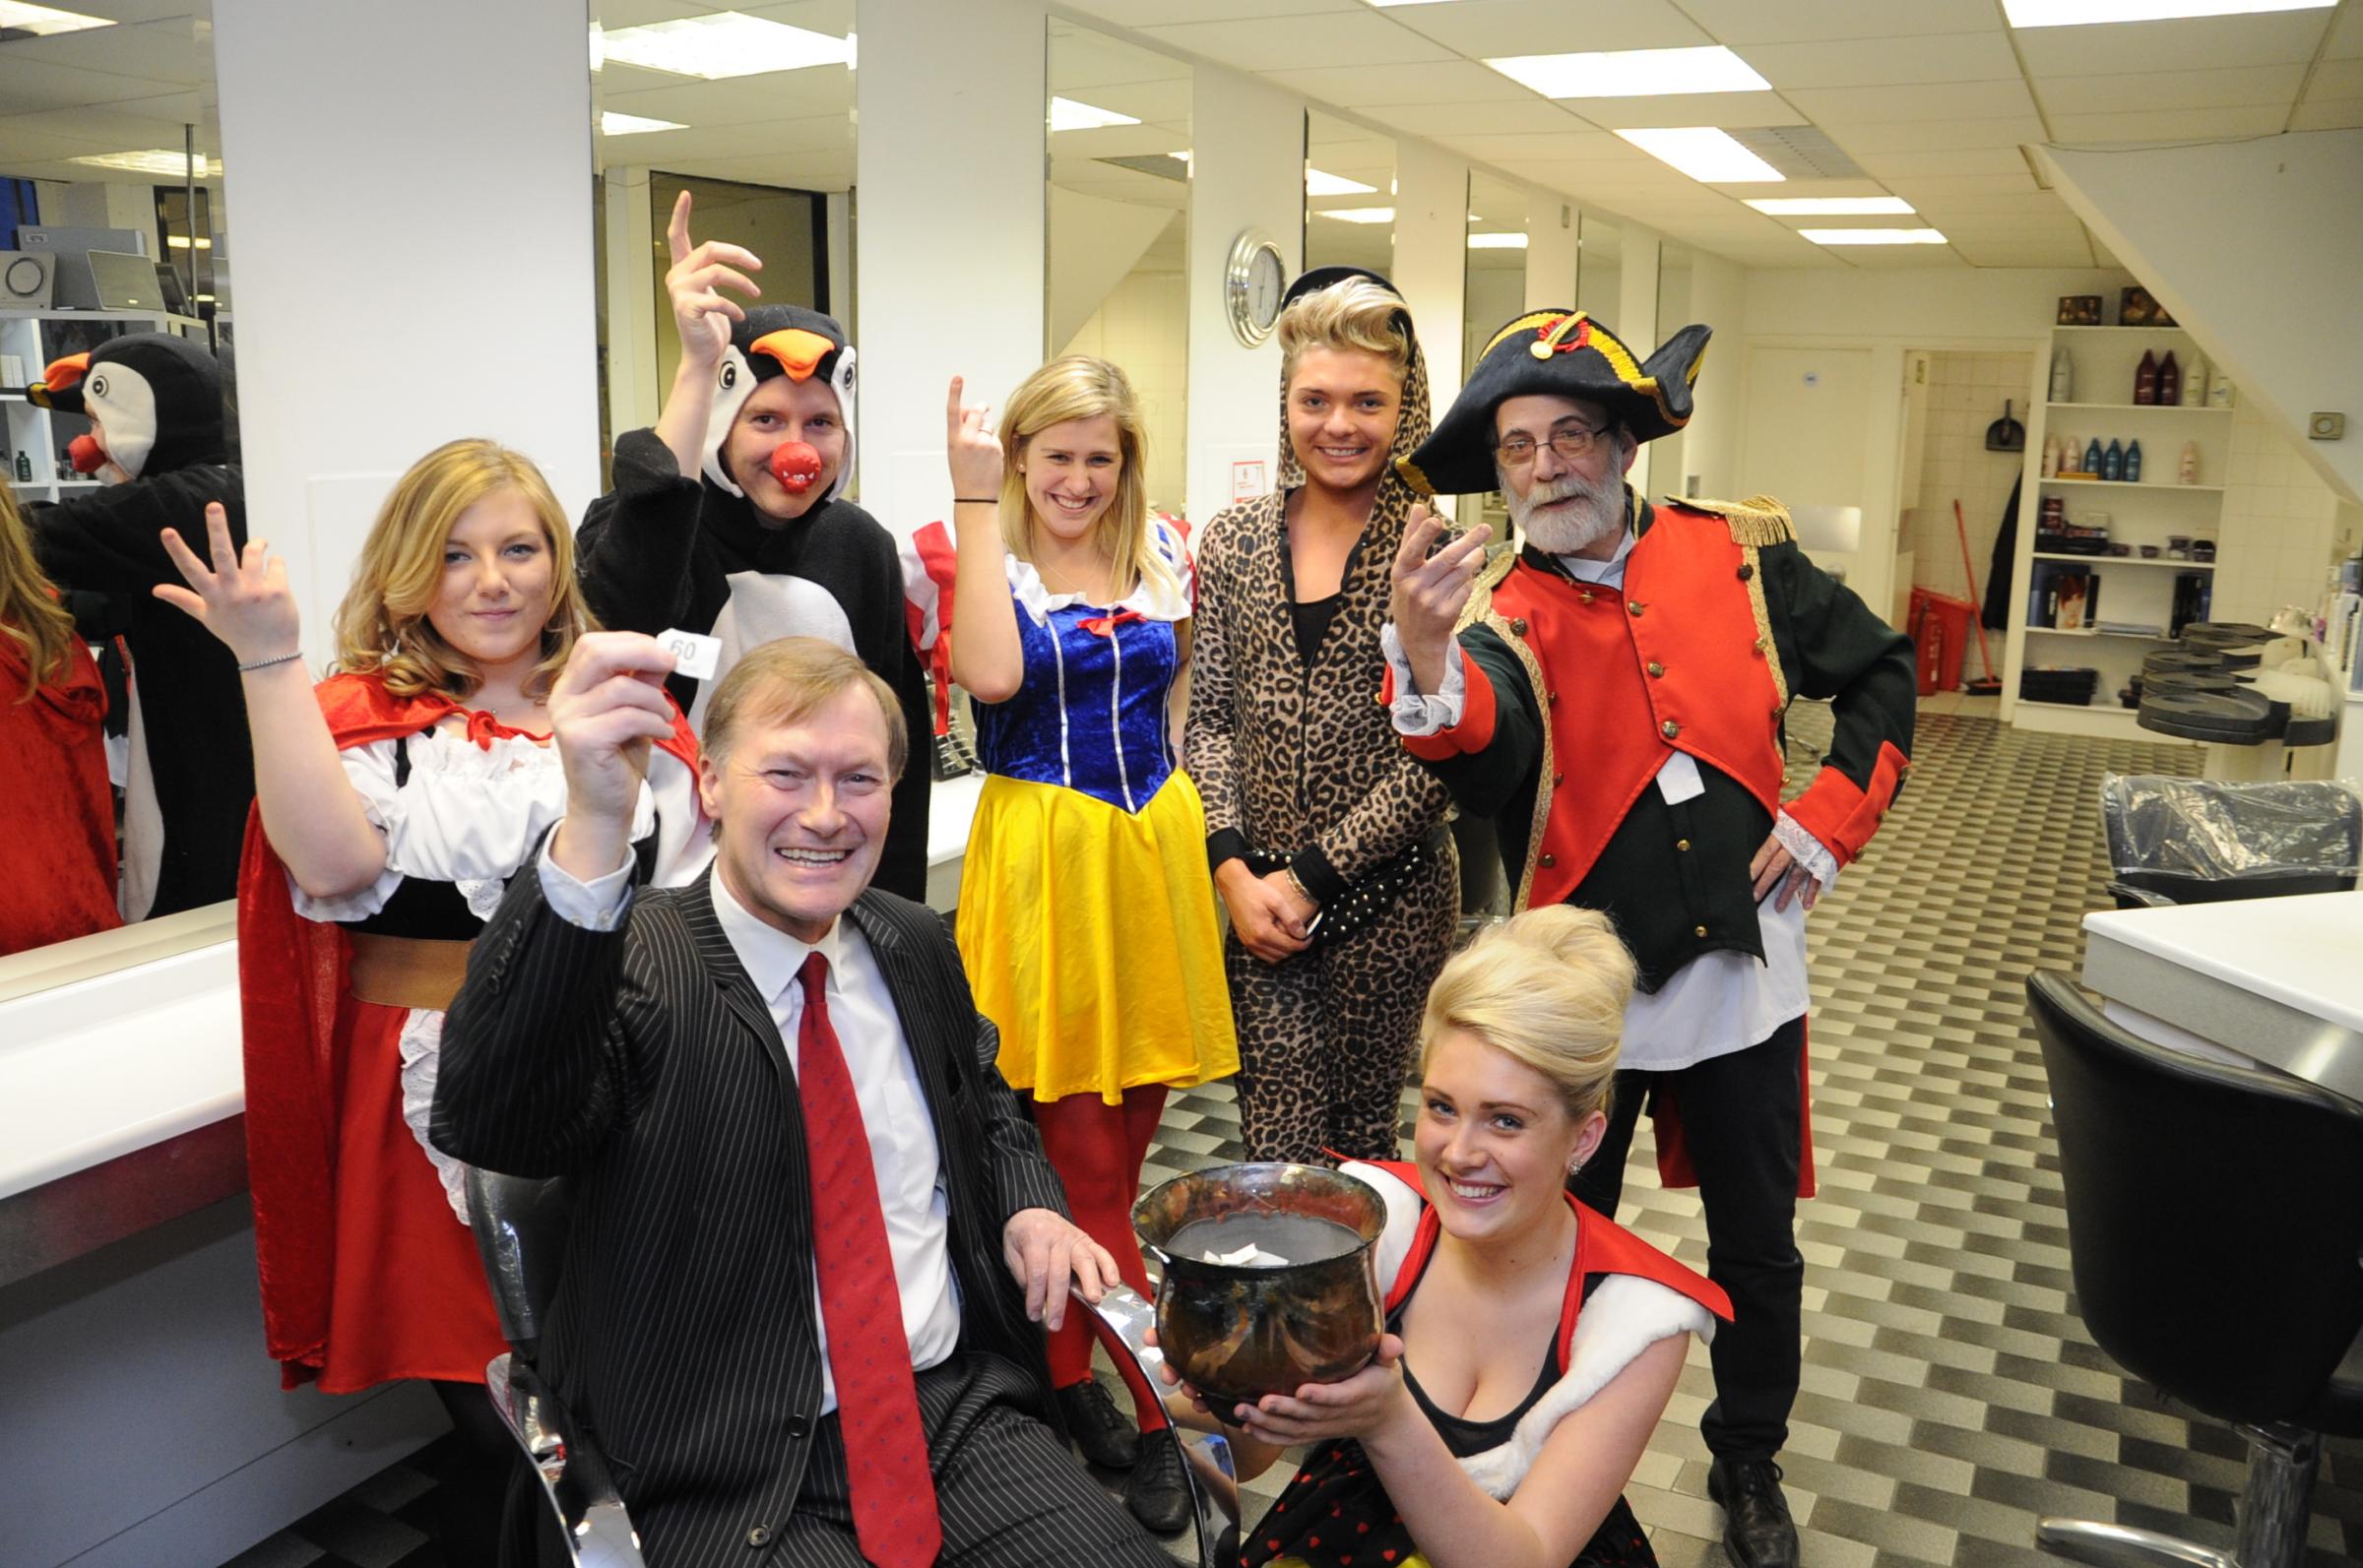 We have a winner - Sir David Amess picks the triumpant raffle ticket at a hairdressers fundraising event in Leigh eight years ago